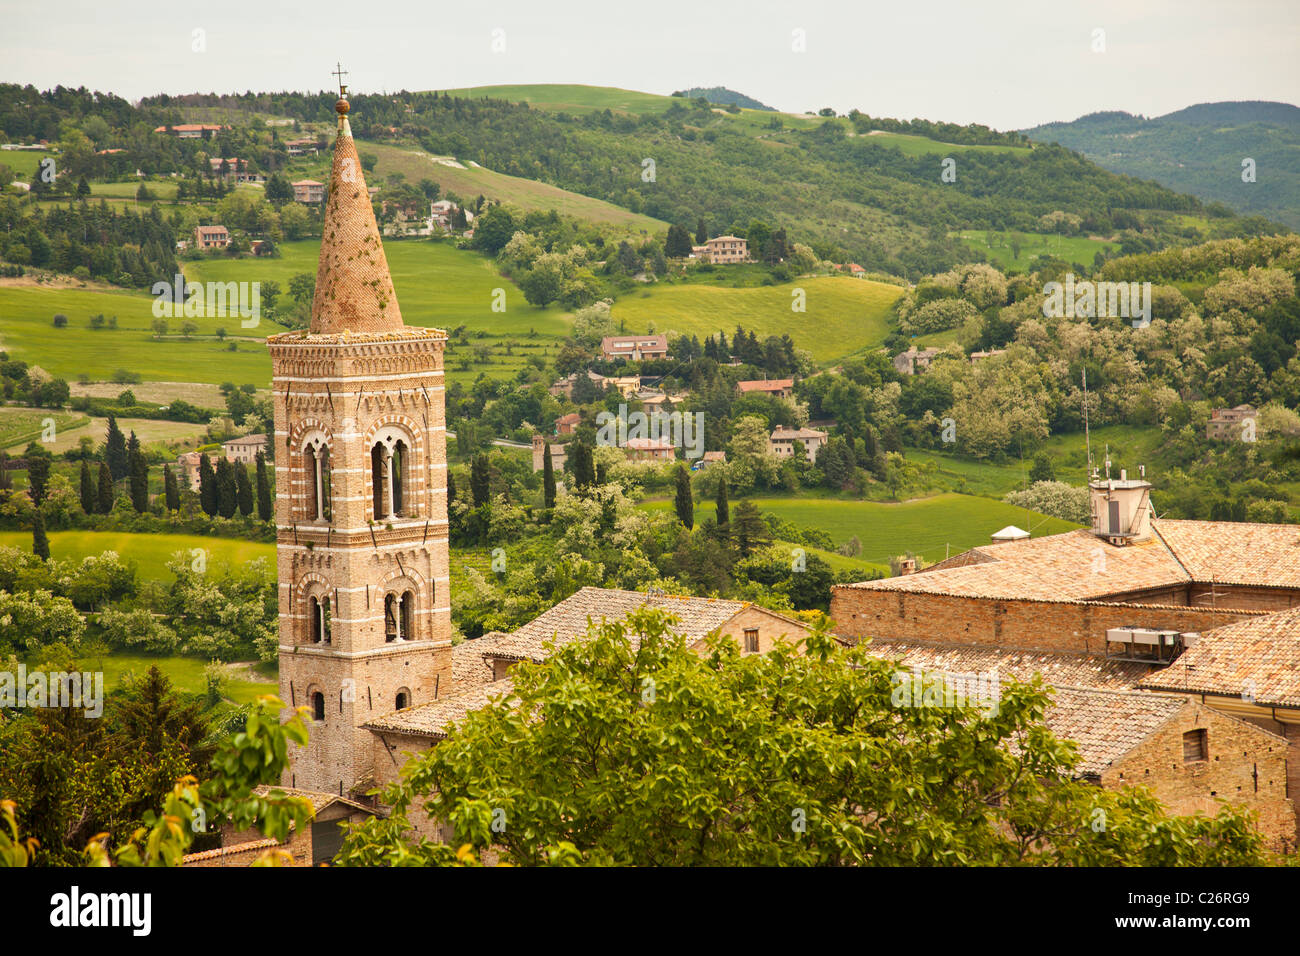 Overlooking the rooftops and countryside of Urbino Italy. Stock Photo